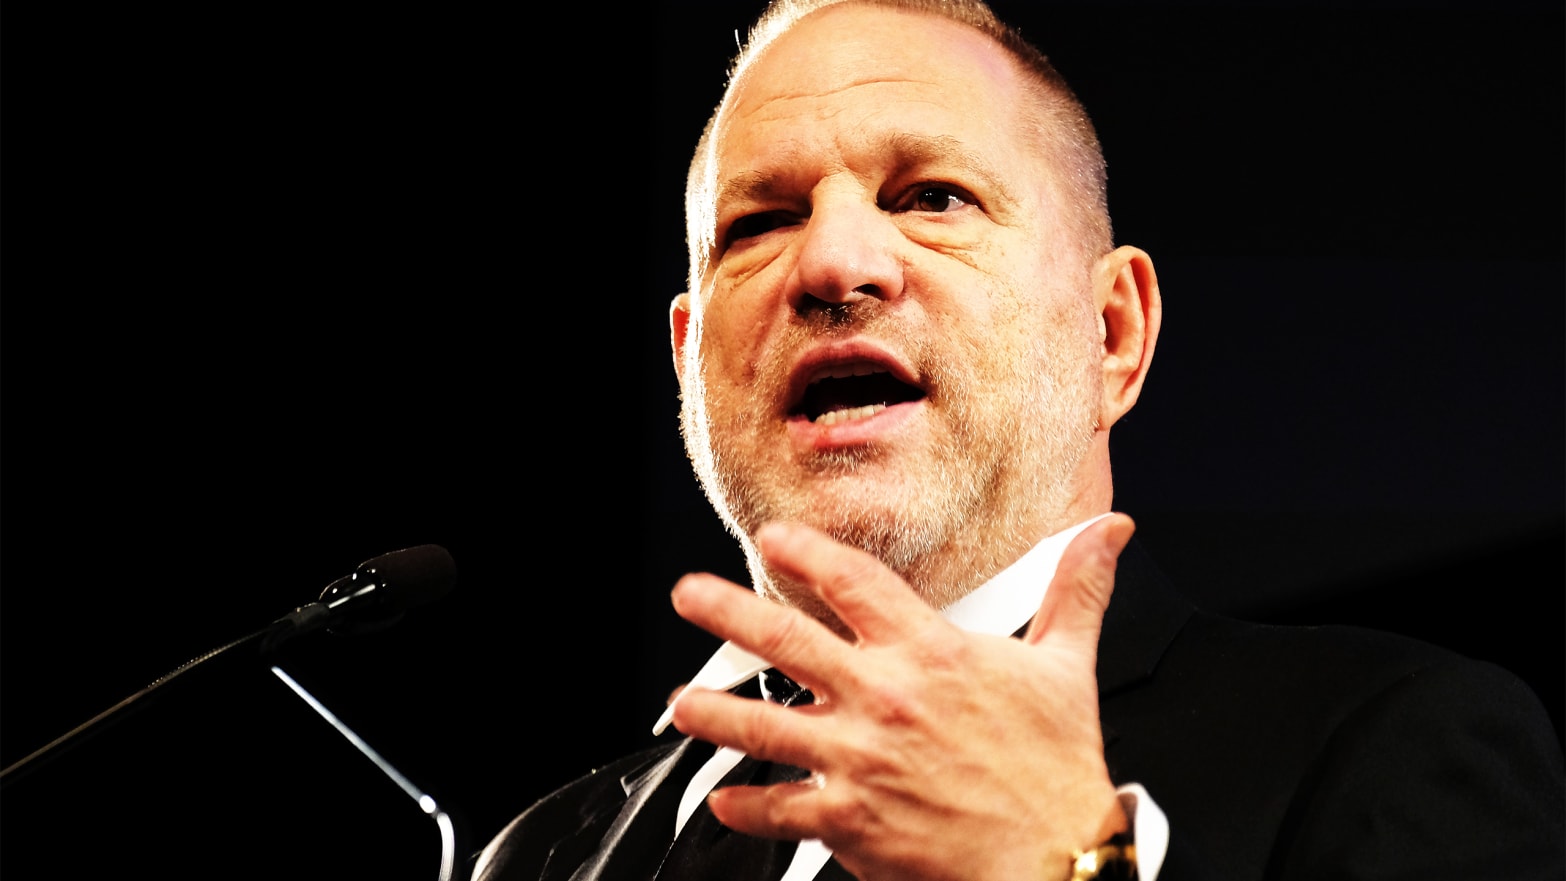 Harvey Weinstein Begged Hollywood Buddies to Write Letters to Save His Job